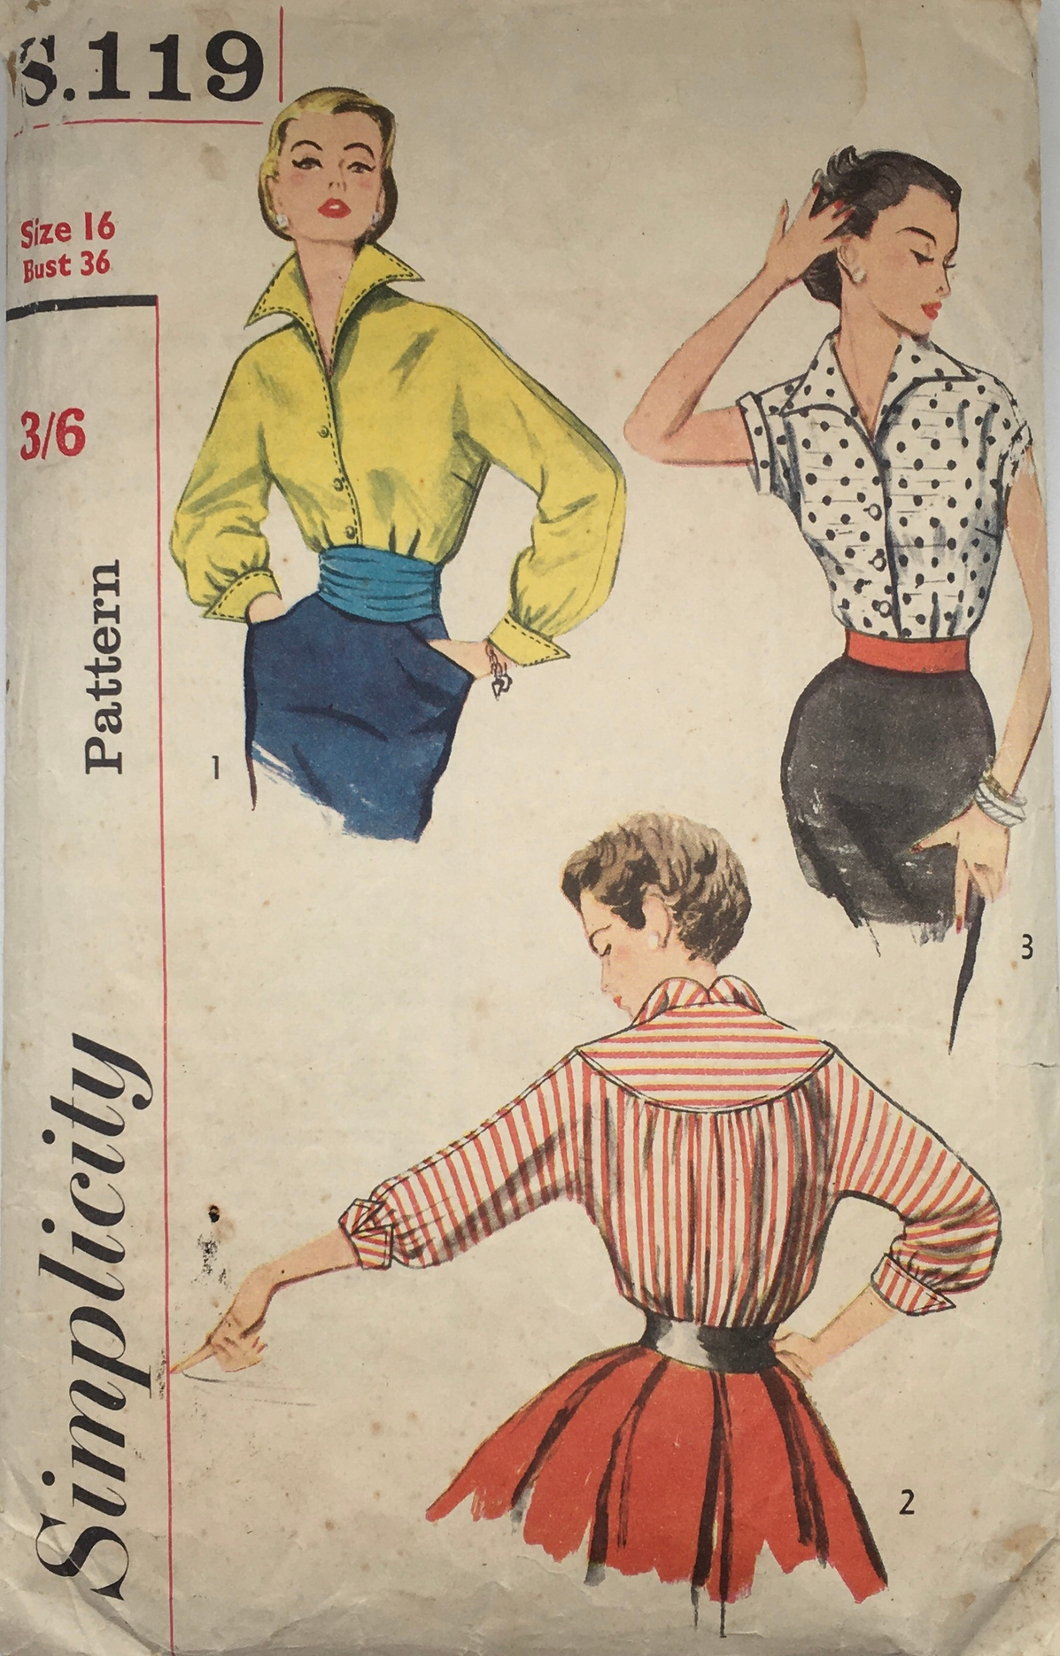 1950's Vintage Sewing Pattern: Simplicity S.119